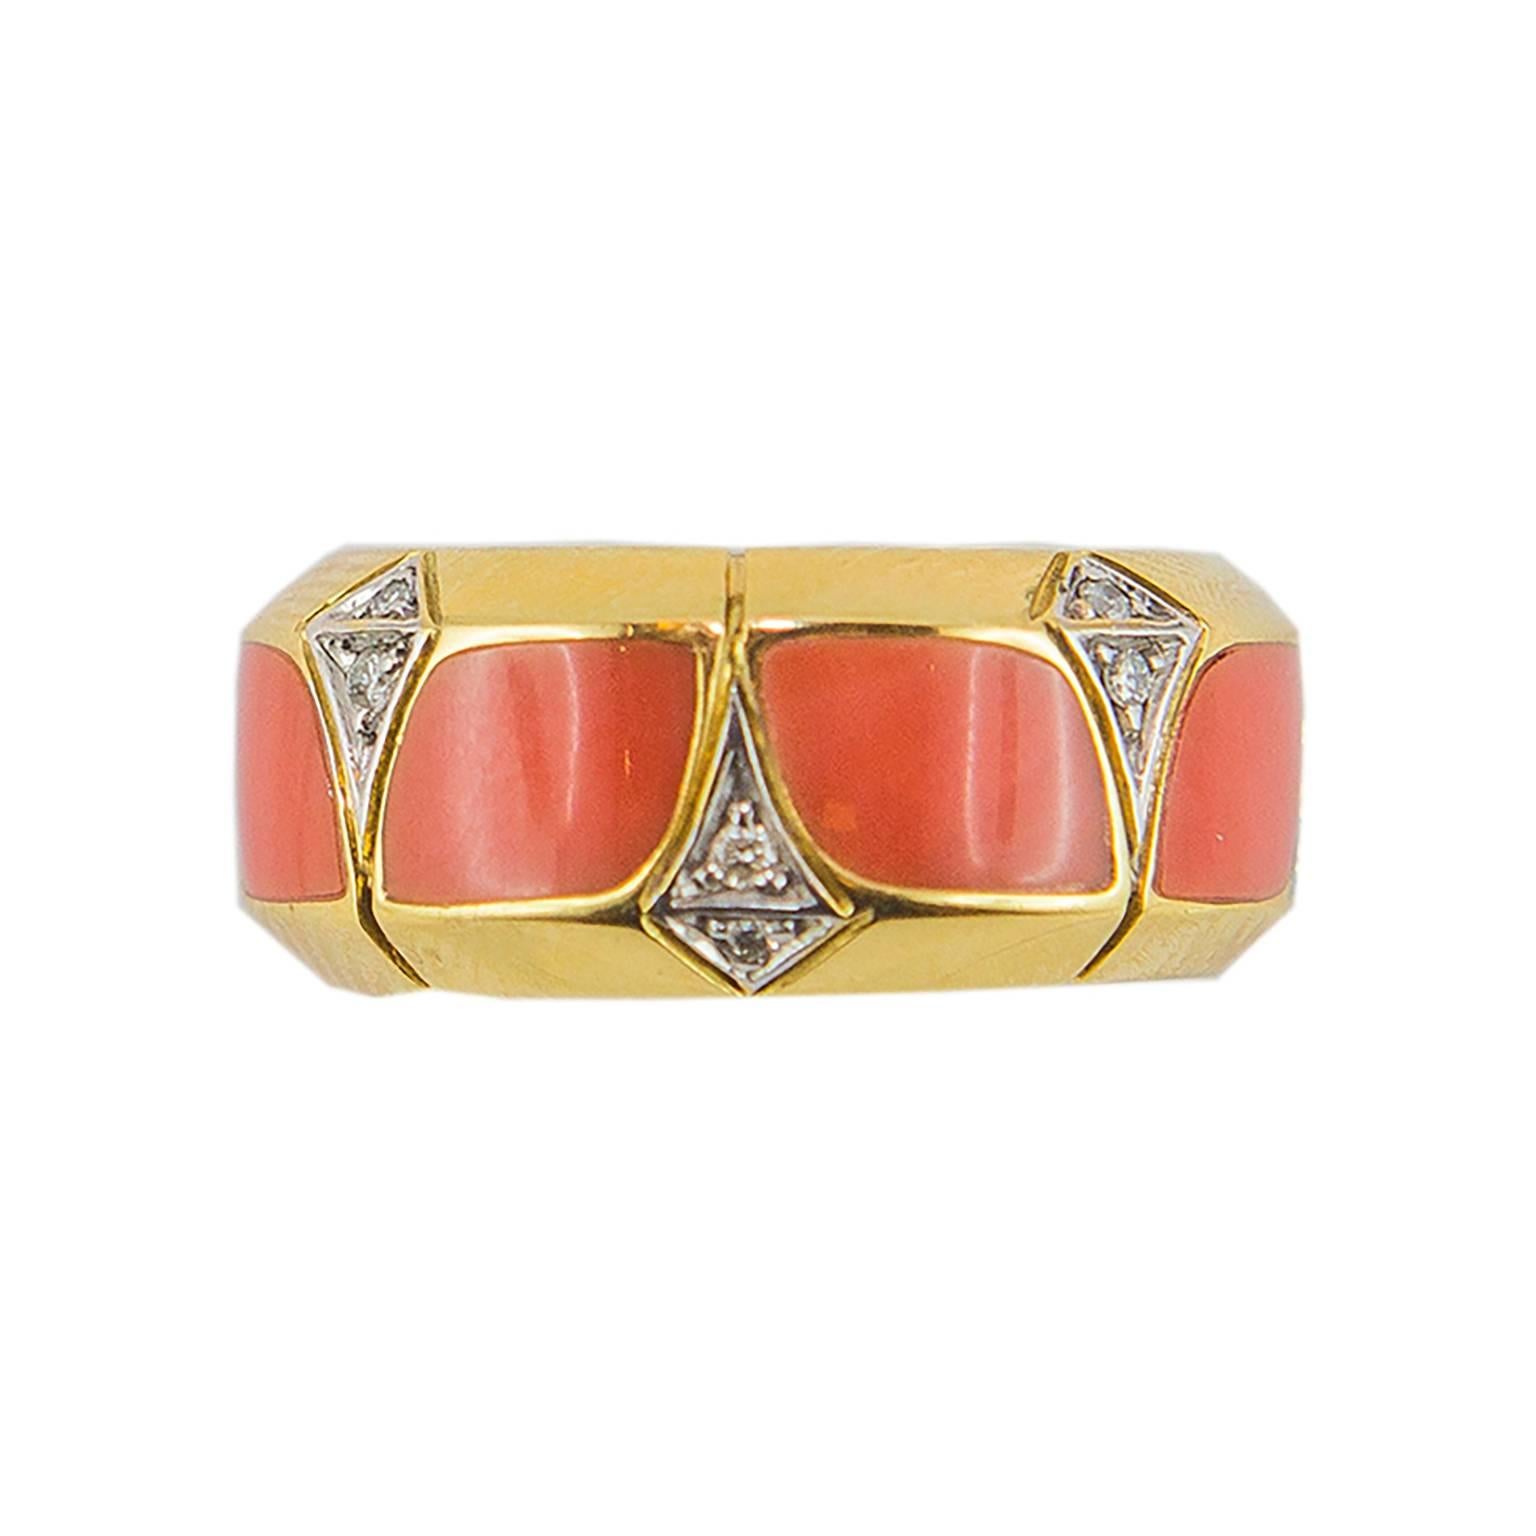 An everyday yet elegant 18KT yellow gold band with a coral petal motif and diamonds details.